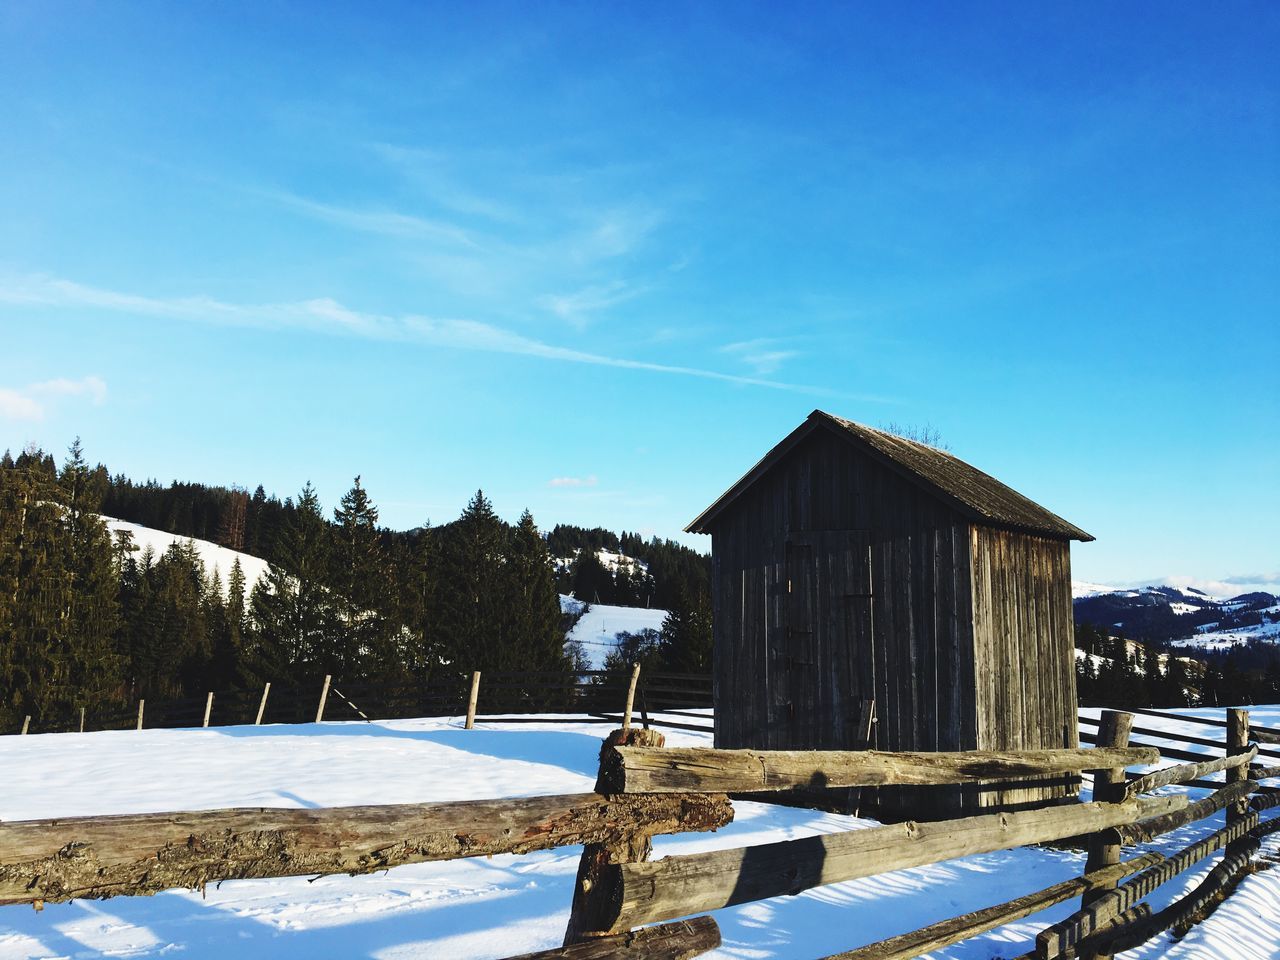 sky, snow, winter, cold temperature, built structure, architecture, blue, day, nature, wood - material, building exterior, sunlight, tranquility, no people, cloud - sky, beauty in nature, barrier, scenics - nature, fence, outdoors, snowcapped mountain